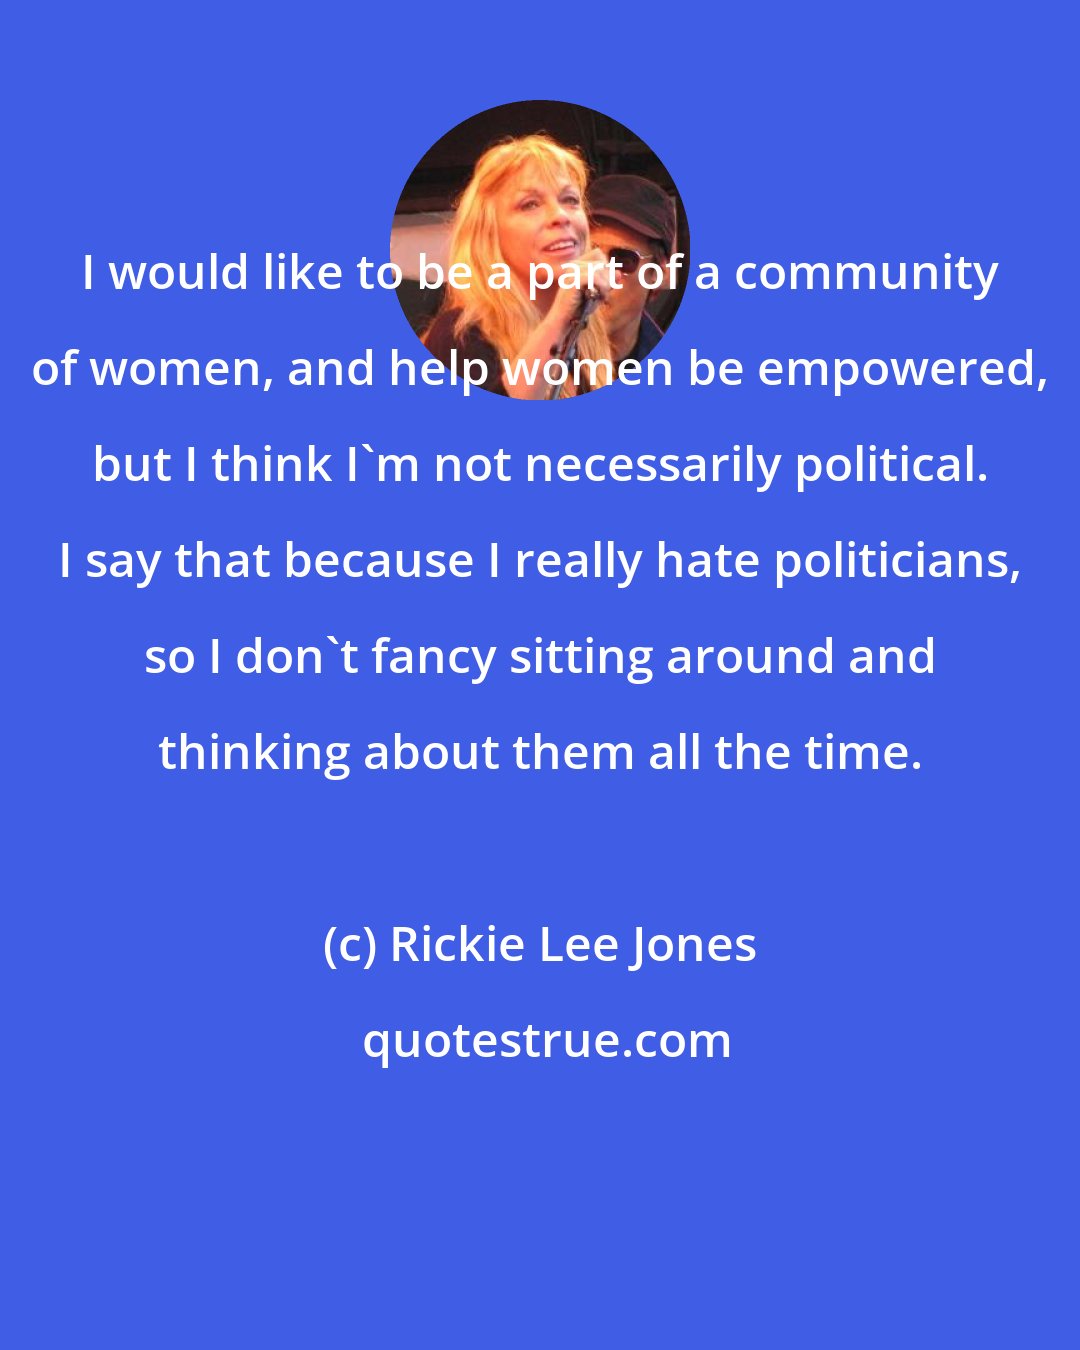 Rickie Lee Jones: I would like to be a part of a community of women, and help women be empowered, but I think I'm not necessarily political. I say that because I really hate politicians, so I don't fancy sitting around and thinking about them all the time.